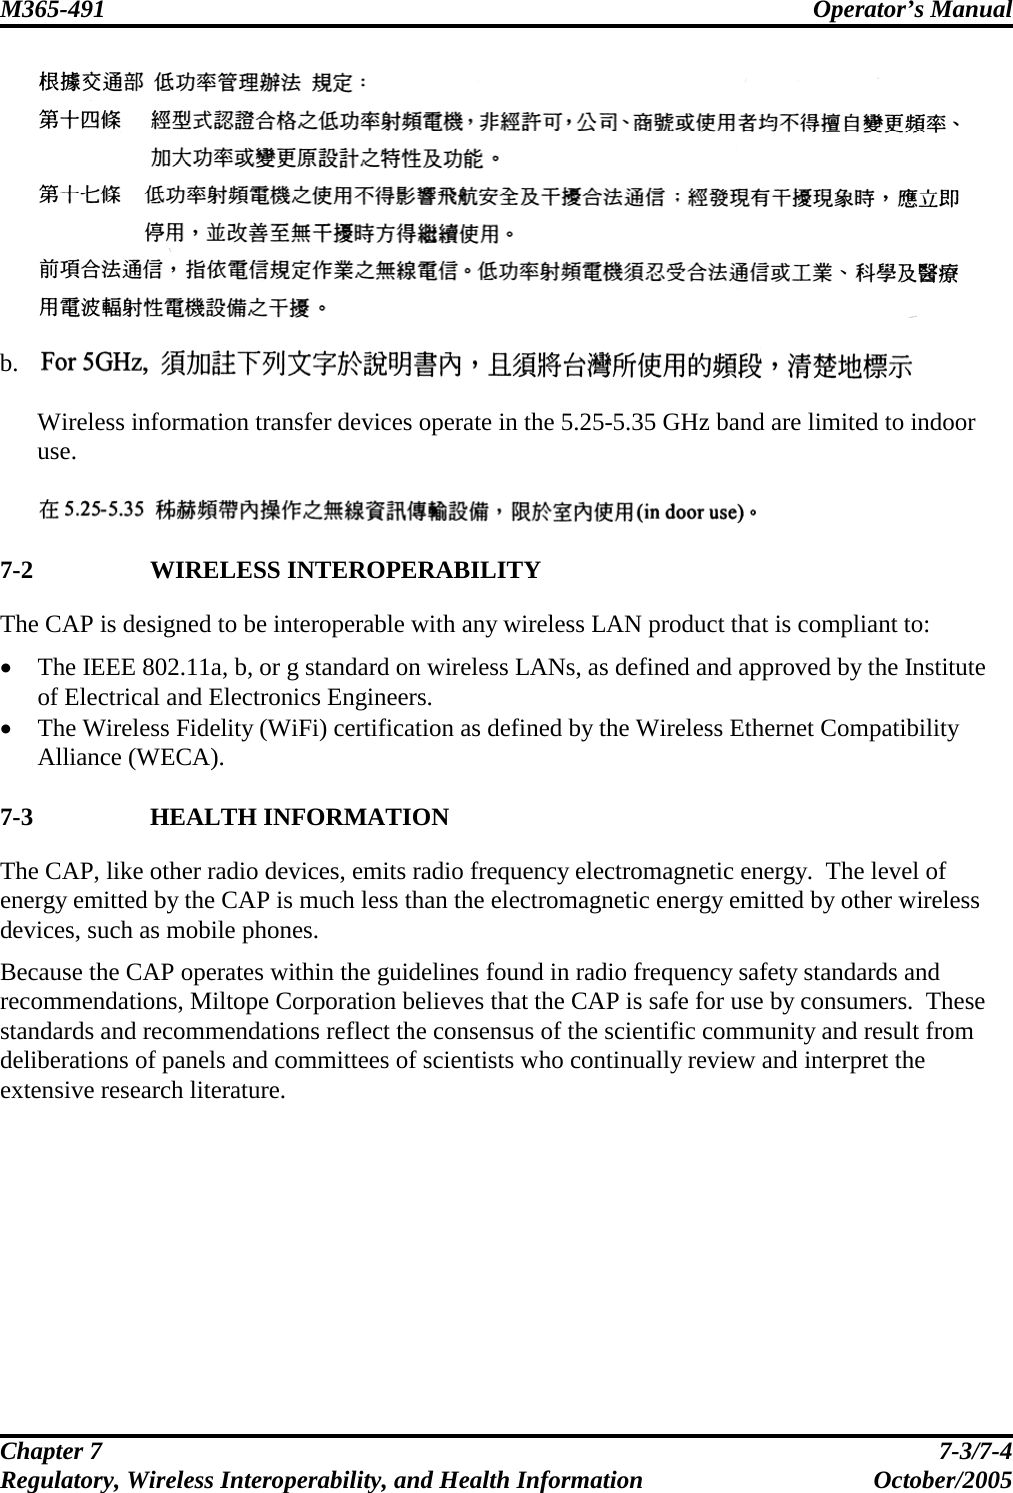 M365-491 Operator’s Manual   Chapter 7  7-3/7-4 Regulatory, Wireless Interoperability, and Health Information October/2005   b.   Wireless information transfer devices operate in the 5.25-5.35 GHz band are limited to indoor use.    7-2 WIRELESS INTEROPERABILITY The CAP is designed to be interoperable with any wireless LAN product that is compliant to: • The IEEE 802.11a, b, or g standard on wireless LANs, as defined and approved by the Institute of Electrical and Electronics Engineers. • The Wireless Fidelity (WiFi) certification as defined by the Wireless Ethernet Compatibility Alliance (WECA).  7-3 HEALTH INFORMATION The CAP, like other radio devices, emits radio frequency electromagnetic energy.  The level of energy emitted by the CAP is much less than the electromagnetic energy emitted by other wireless devices, such as mobile phones. Because the CAP operates within the guidelines found in radio frequency safety standards and recommendations, Miltope Corporation believes that the CAP is safe for use by consumers.  These standards and recommendations reflect the consensus of the scientific community and result from deliberations of panels and committees of scientists who continually review and interpret the extensive research literature.  